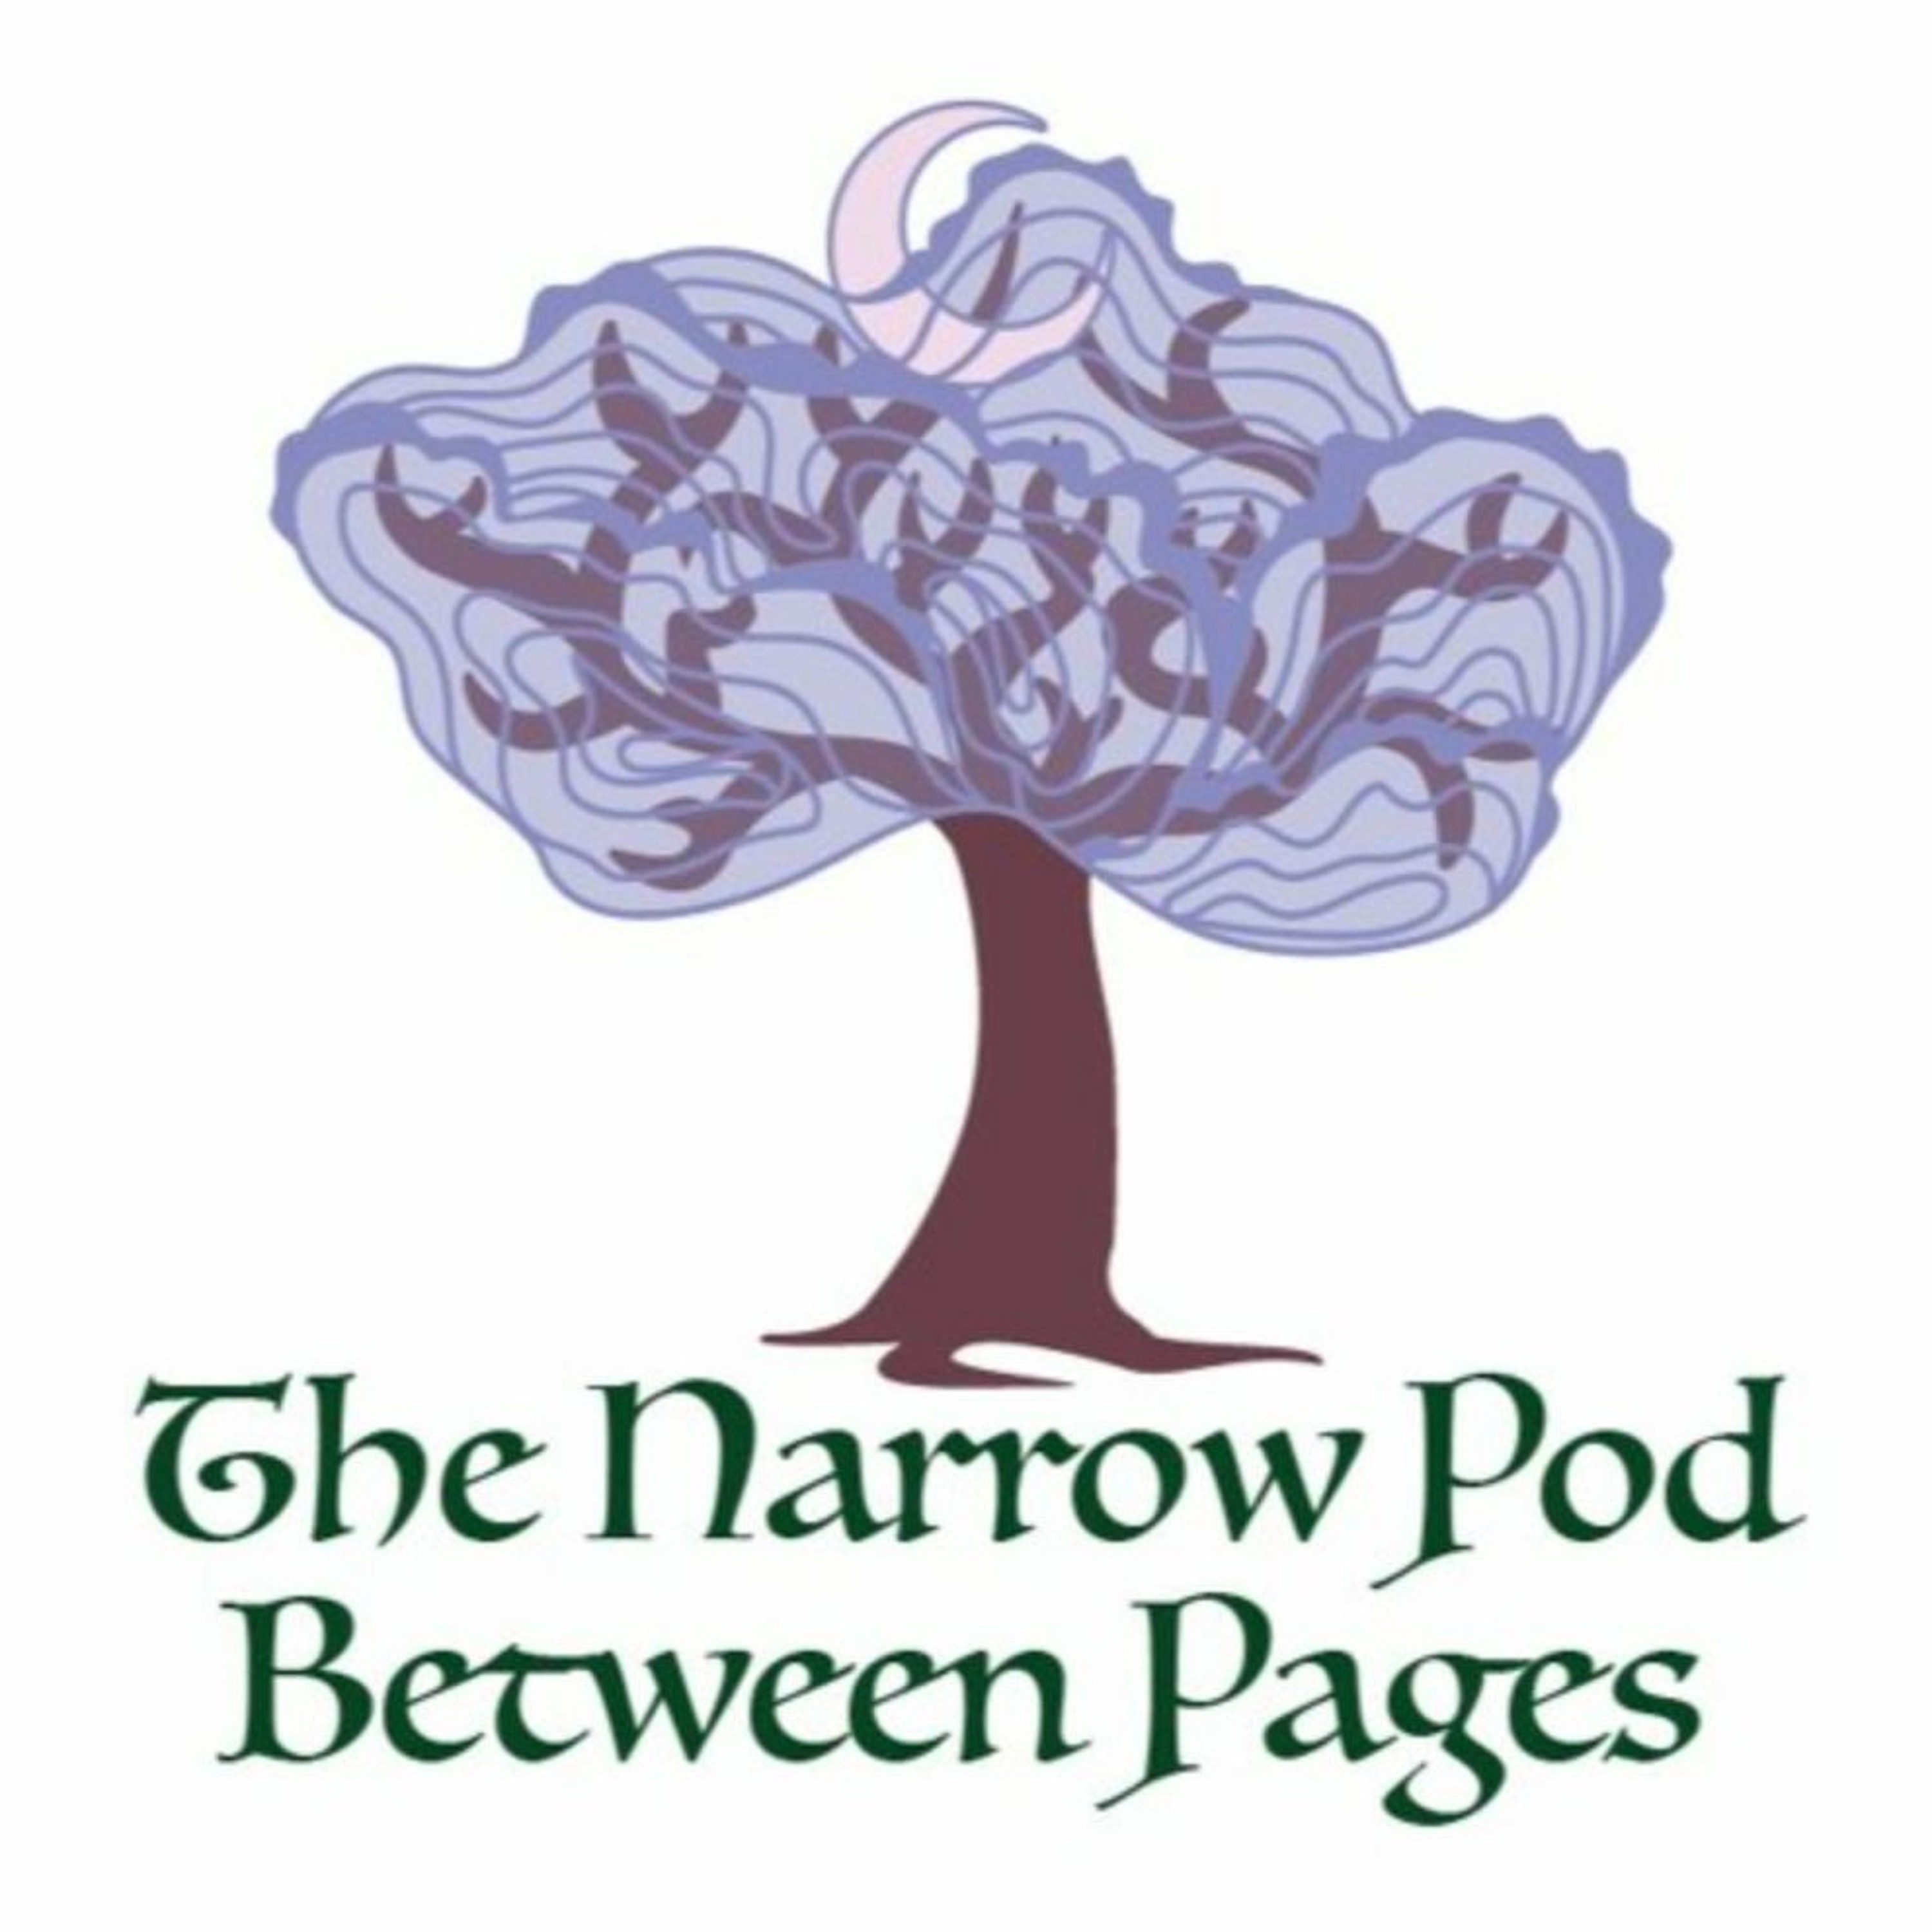 The Narrow Pod Between Pages - Page 206: Cromulently Eggoliant